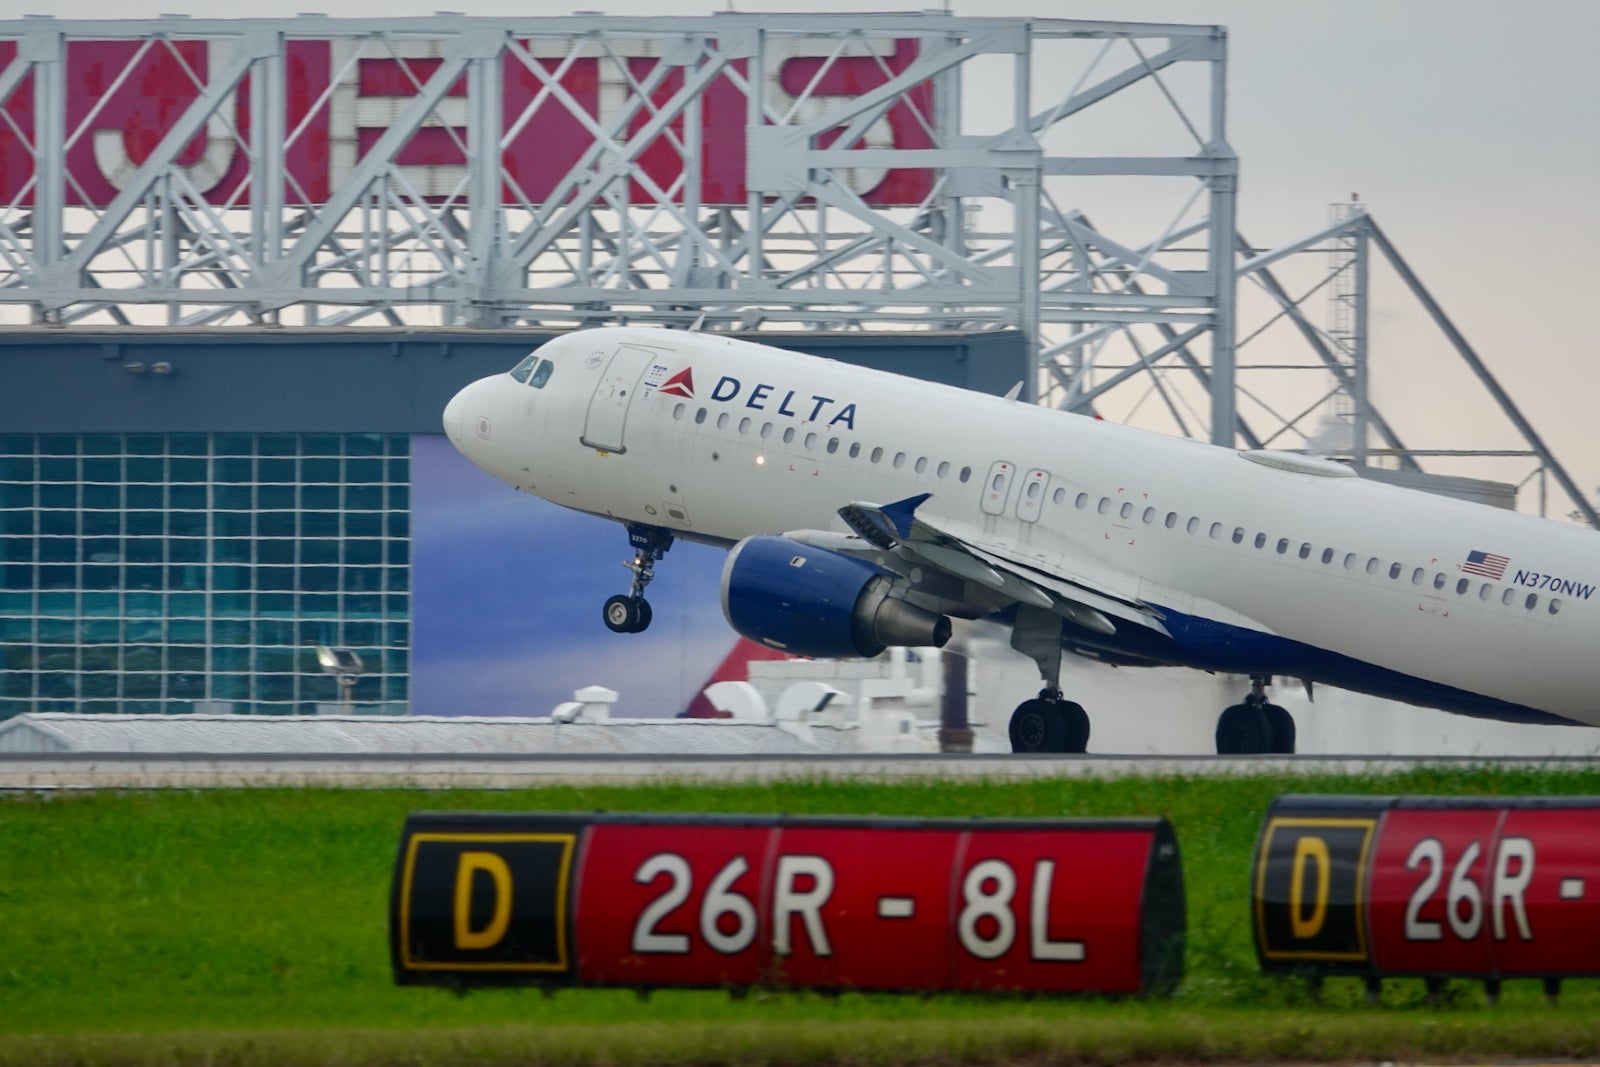 Delta Airbus A320 Takeoff